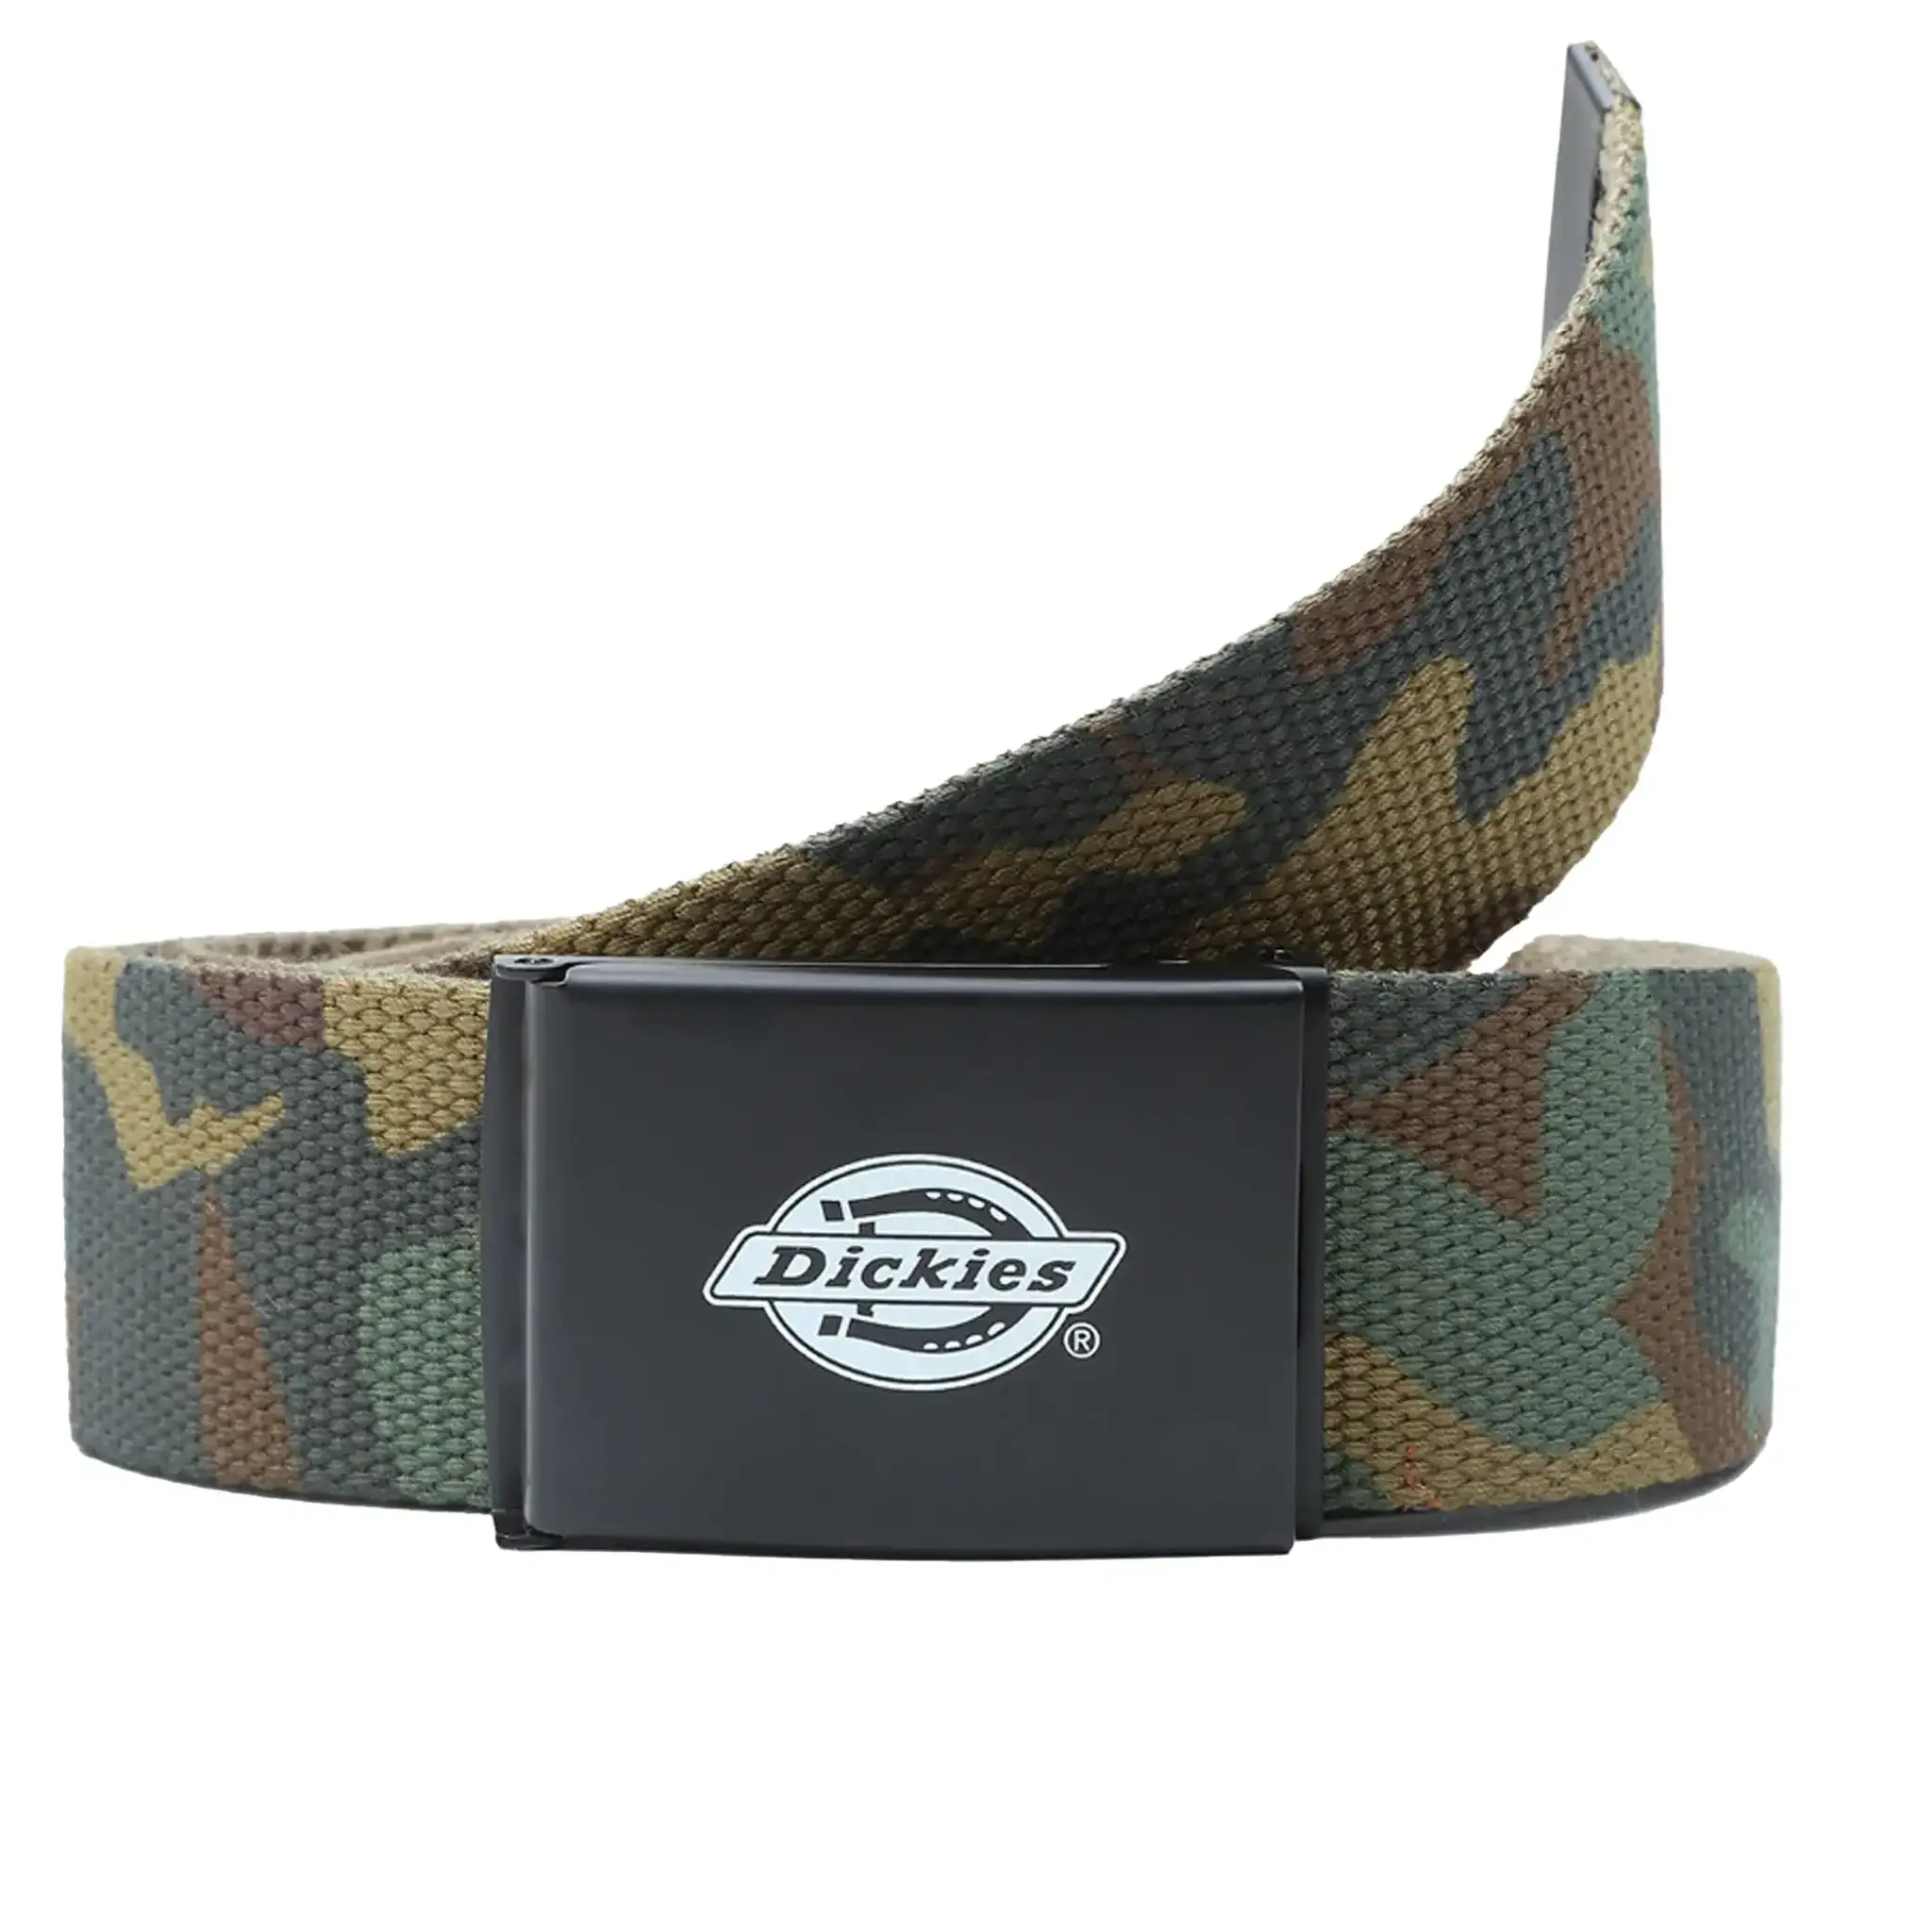 Dickies / riem Orcutt in camouflage